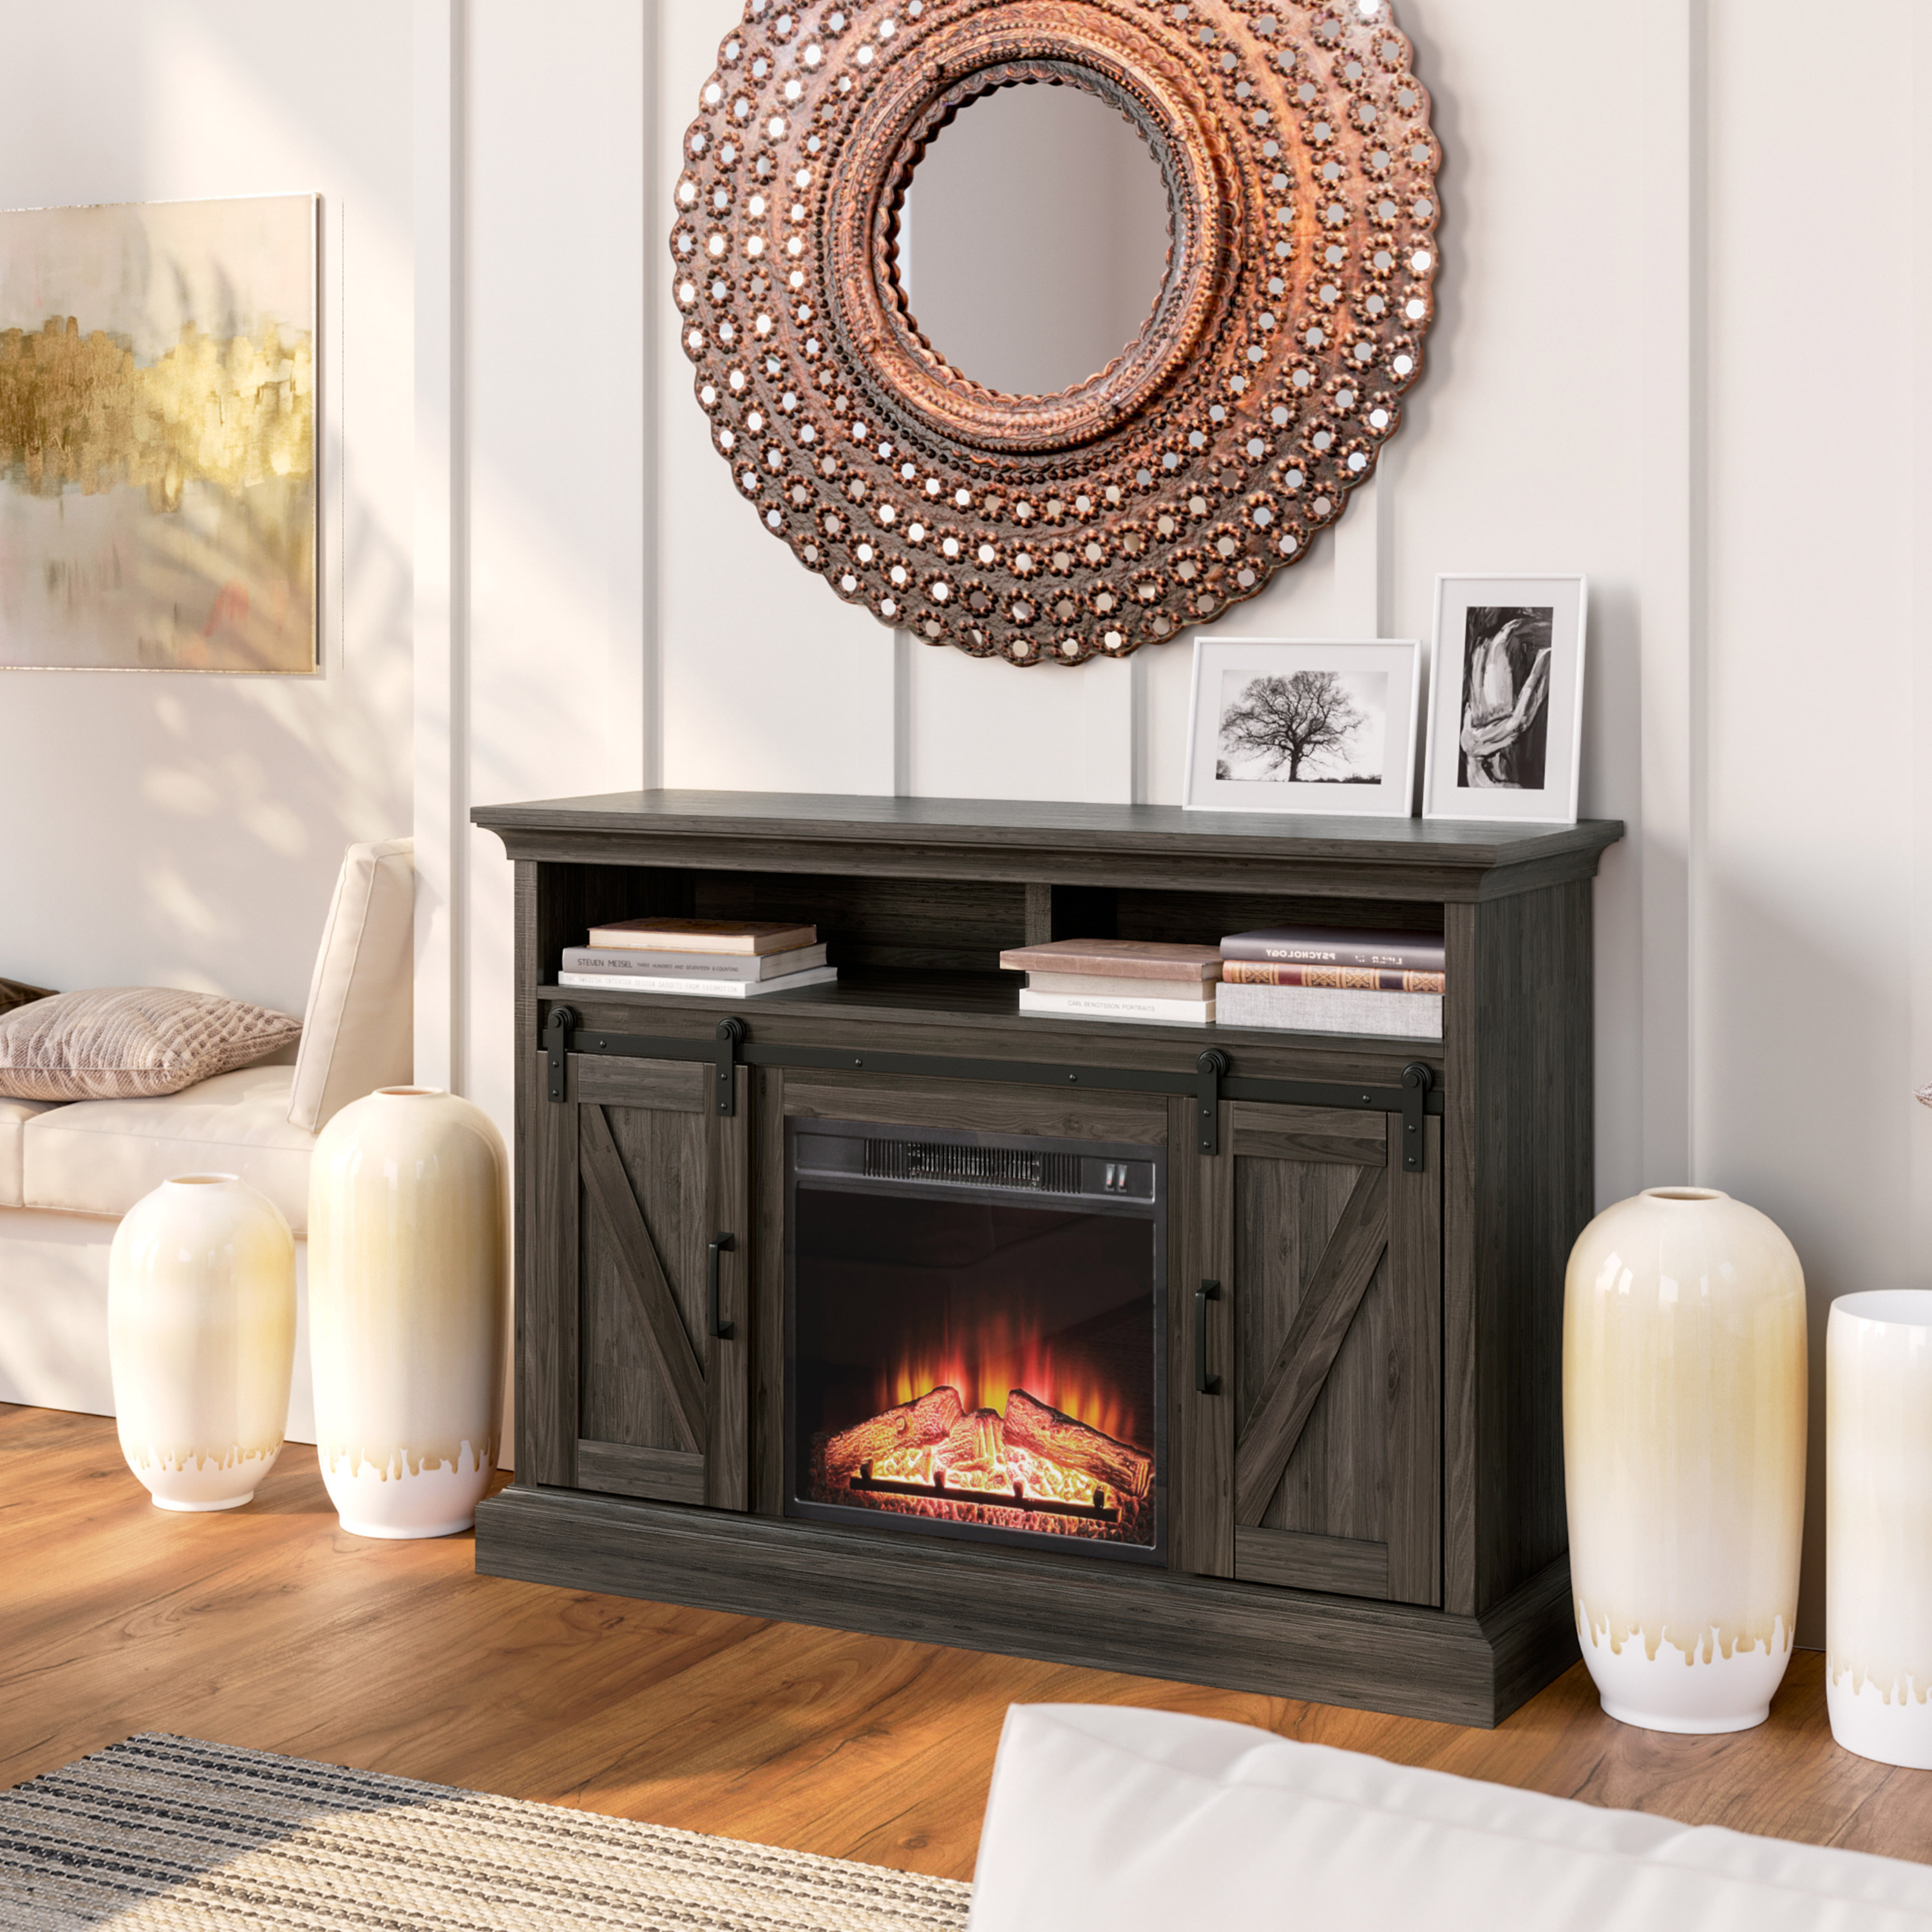 Whalen Allston Barn Door Fireplace TV Stand for TVs Up to 58" - image 5 of 8